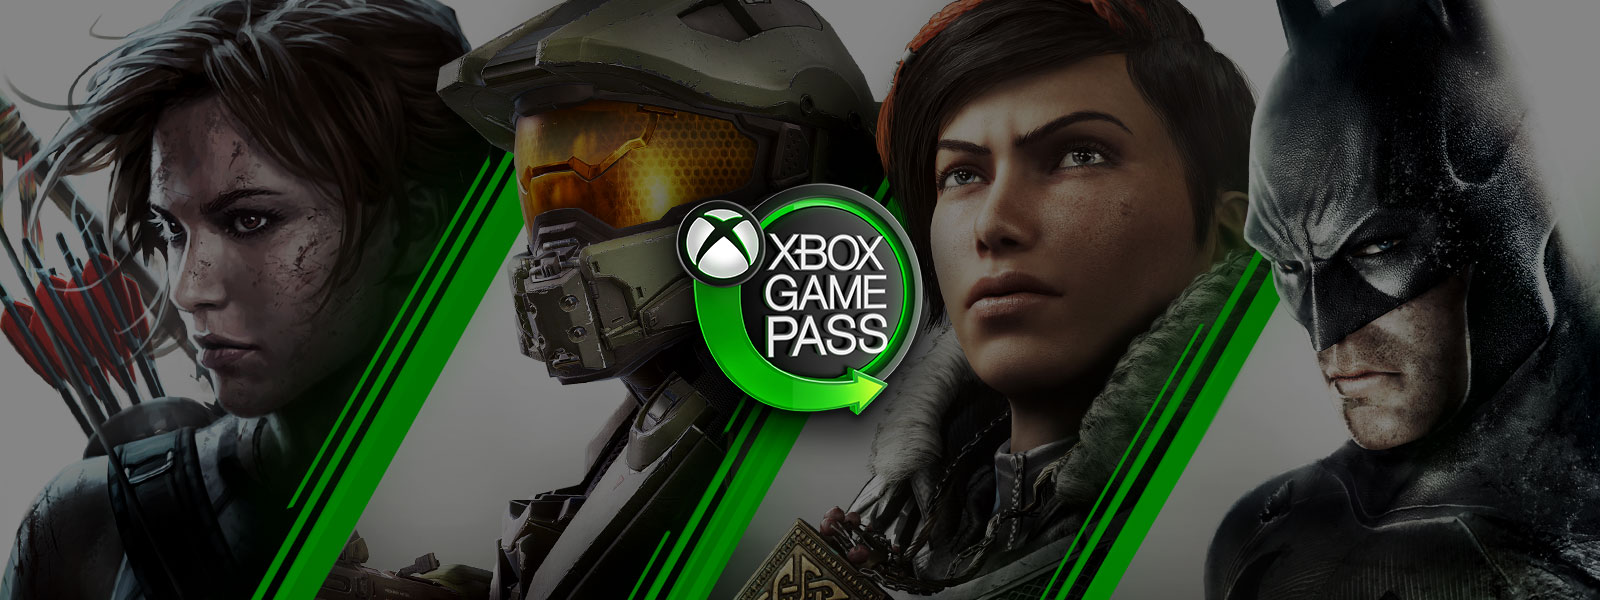 Xbox Game Pass neon sign with Xbox nexus logo and green arrow surrounded by Lara Croft, Master Chief, Kait Diaz, and Batman.